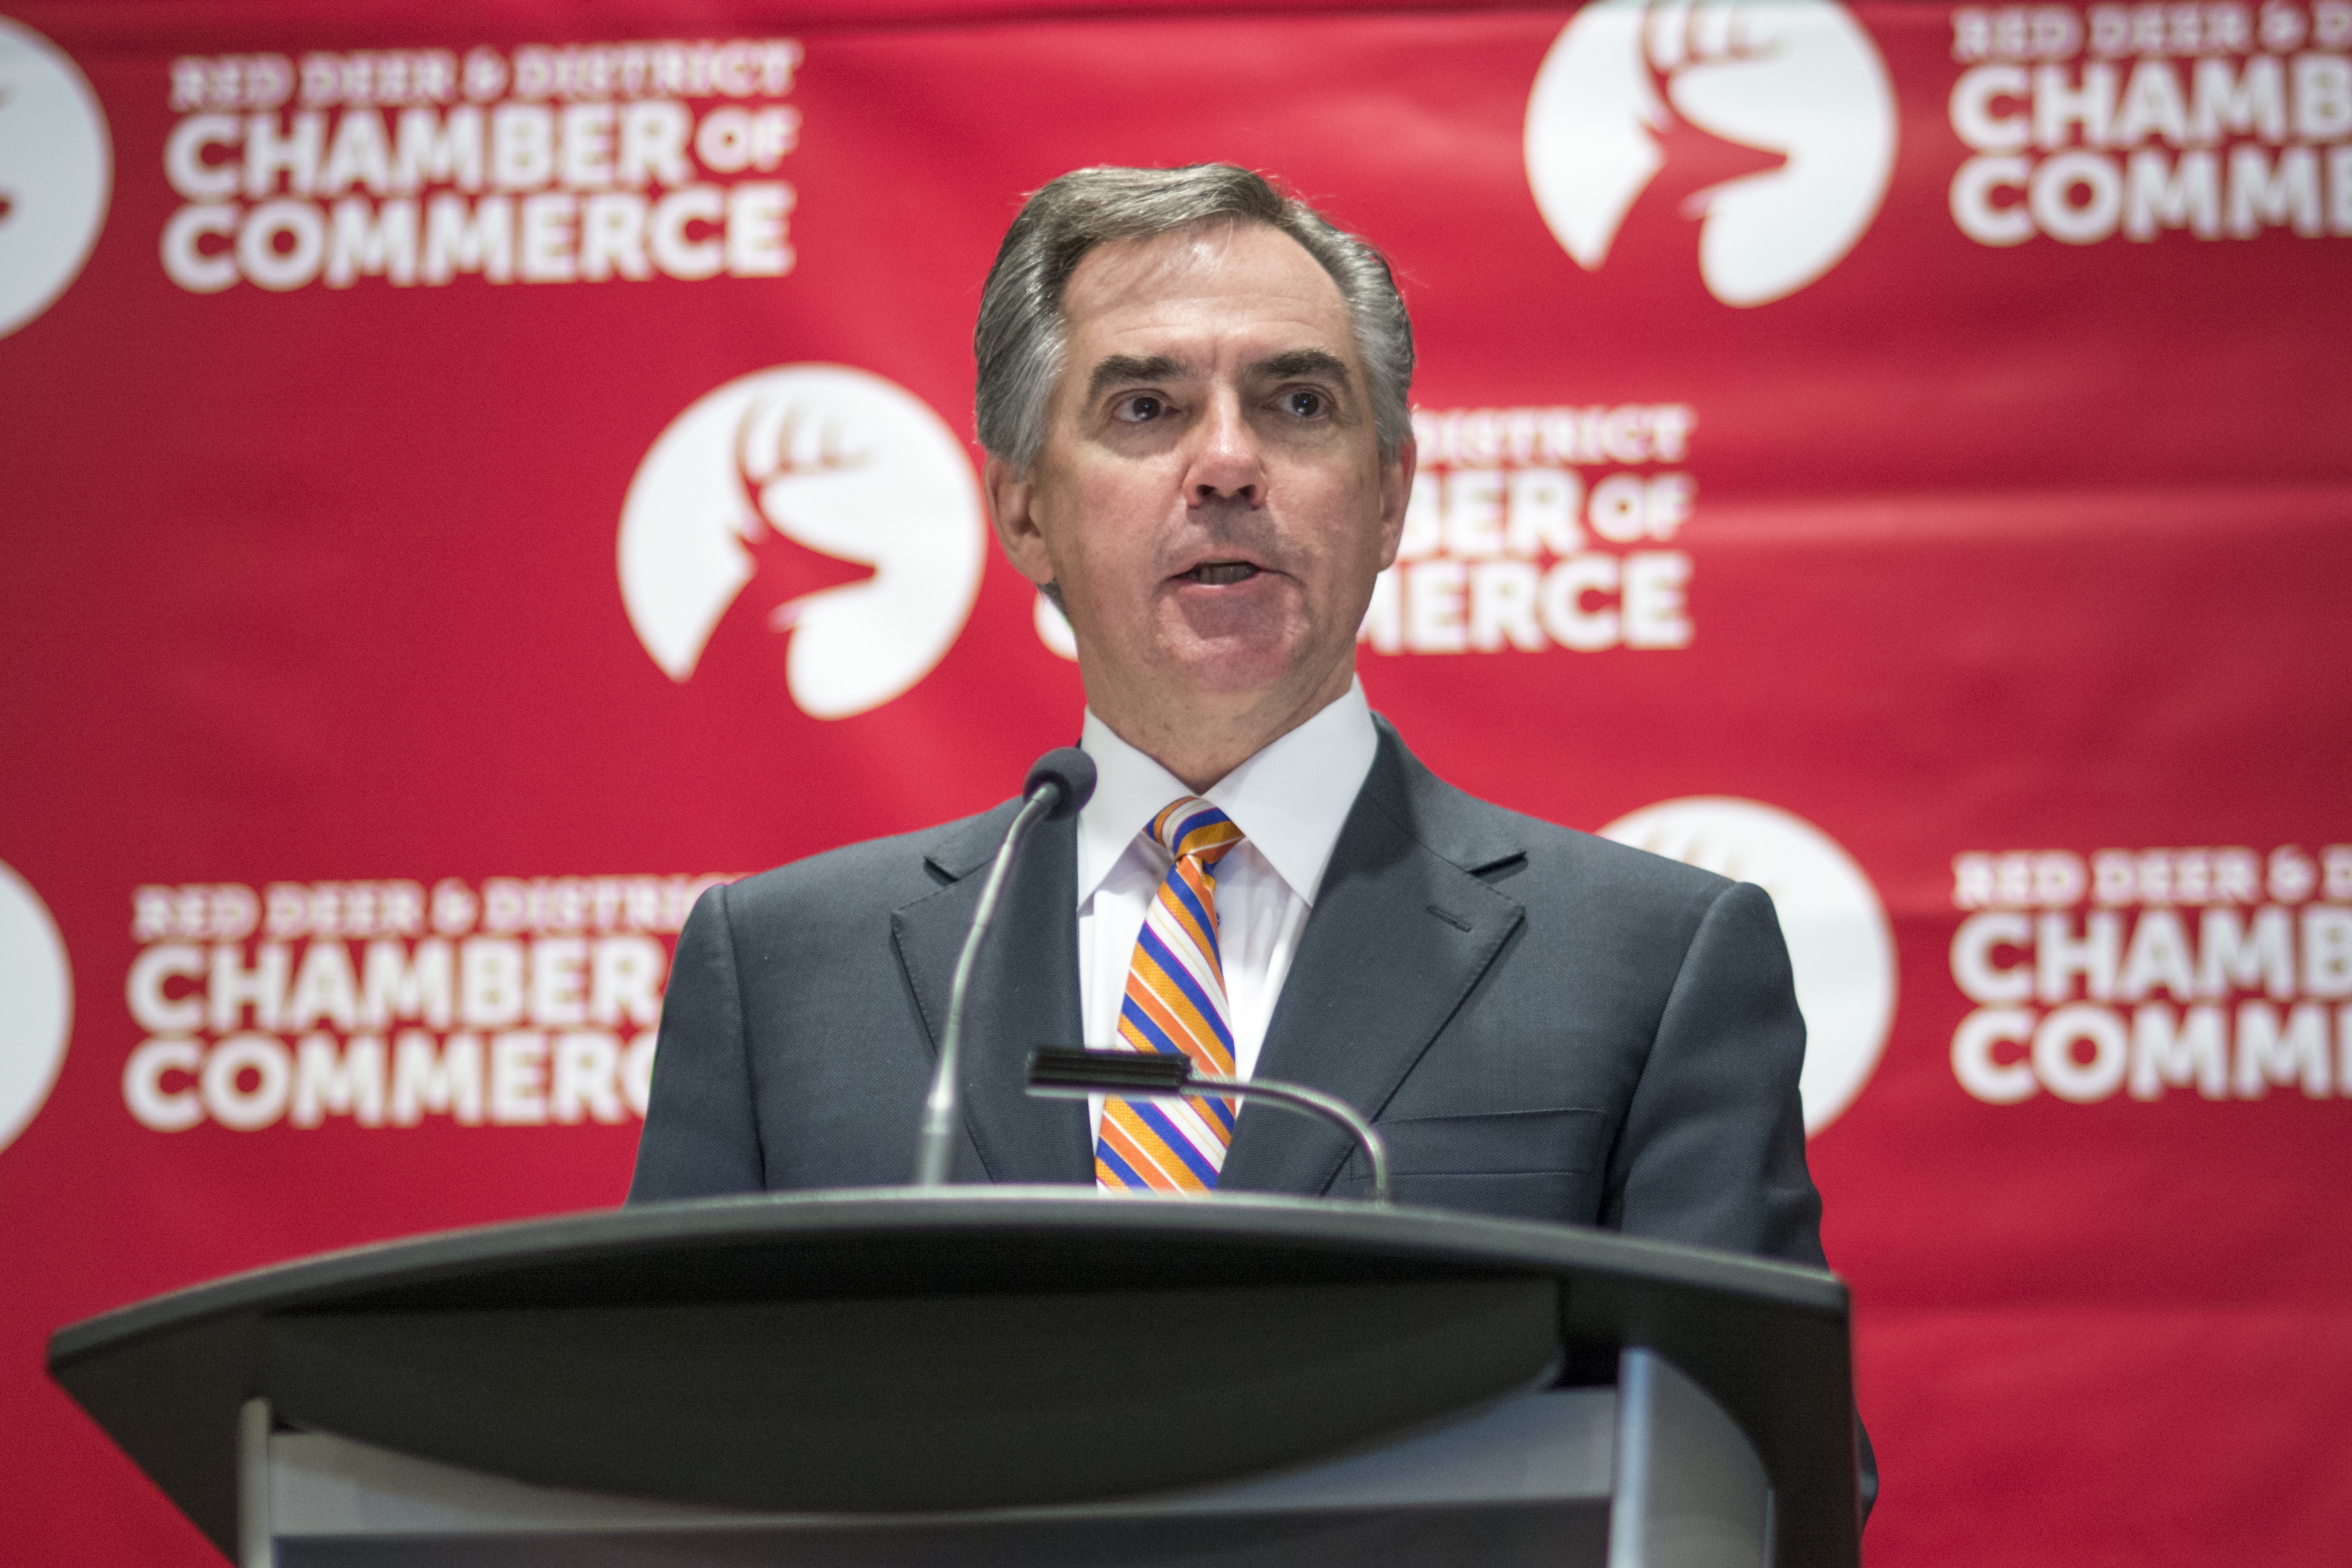 BUDGET TALK – Premier Jim Prentice visited Red Deer last week as part of the Chamber of Commerce luncheon. Prentice addressed the crowd on the impacts of the PC party’s new provincial budget among other things.